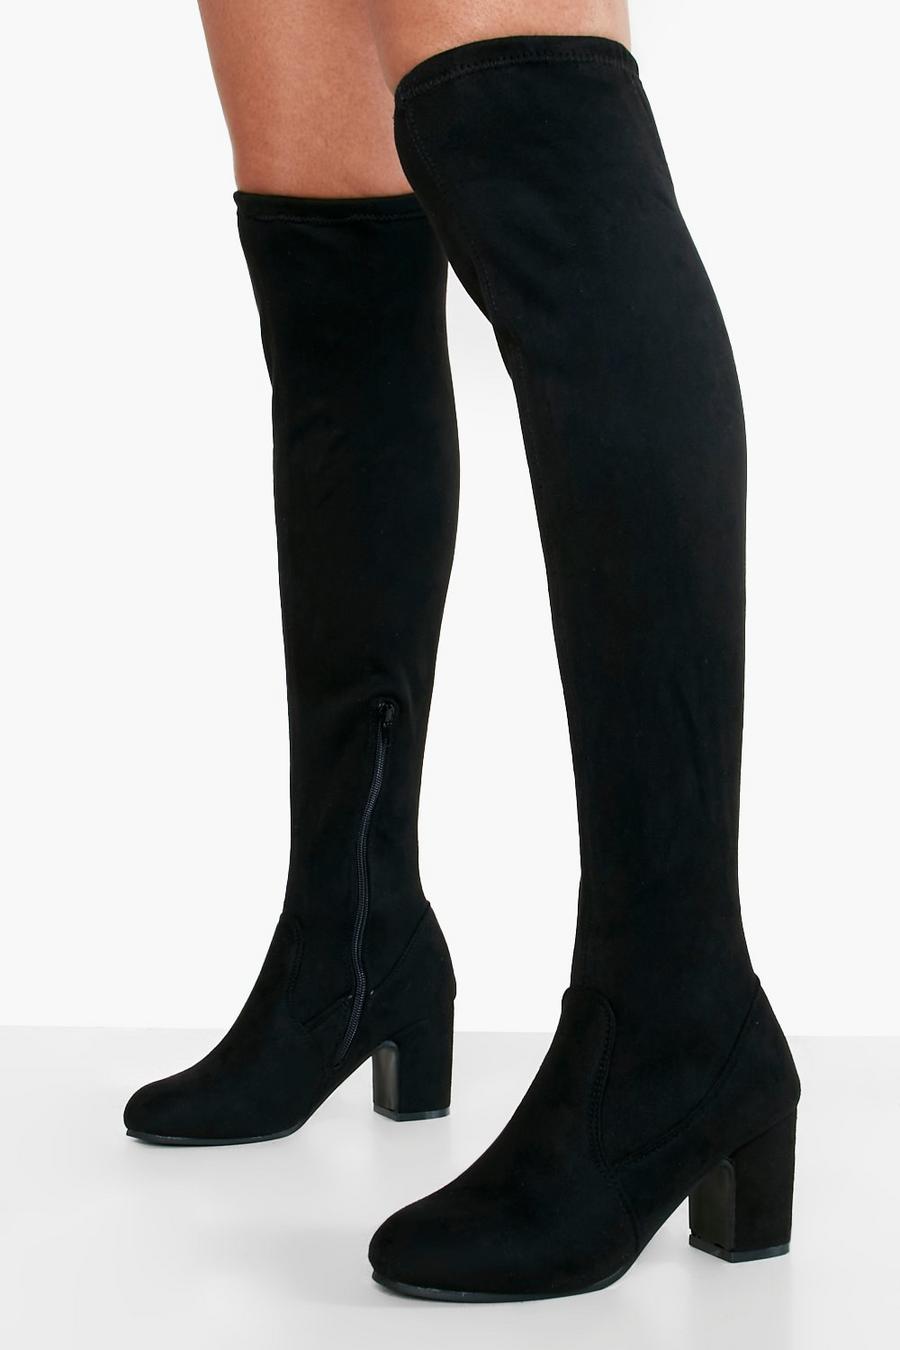 Black Wide Fit Block Heel Stretch Over The Knee Boots